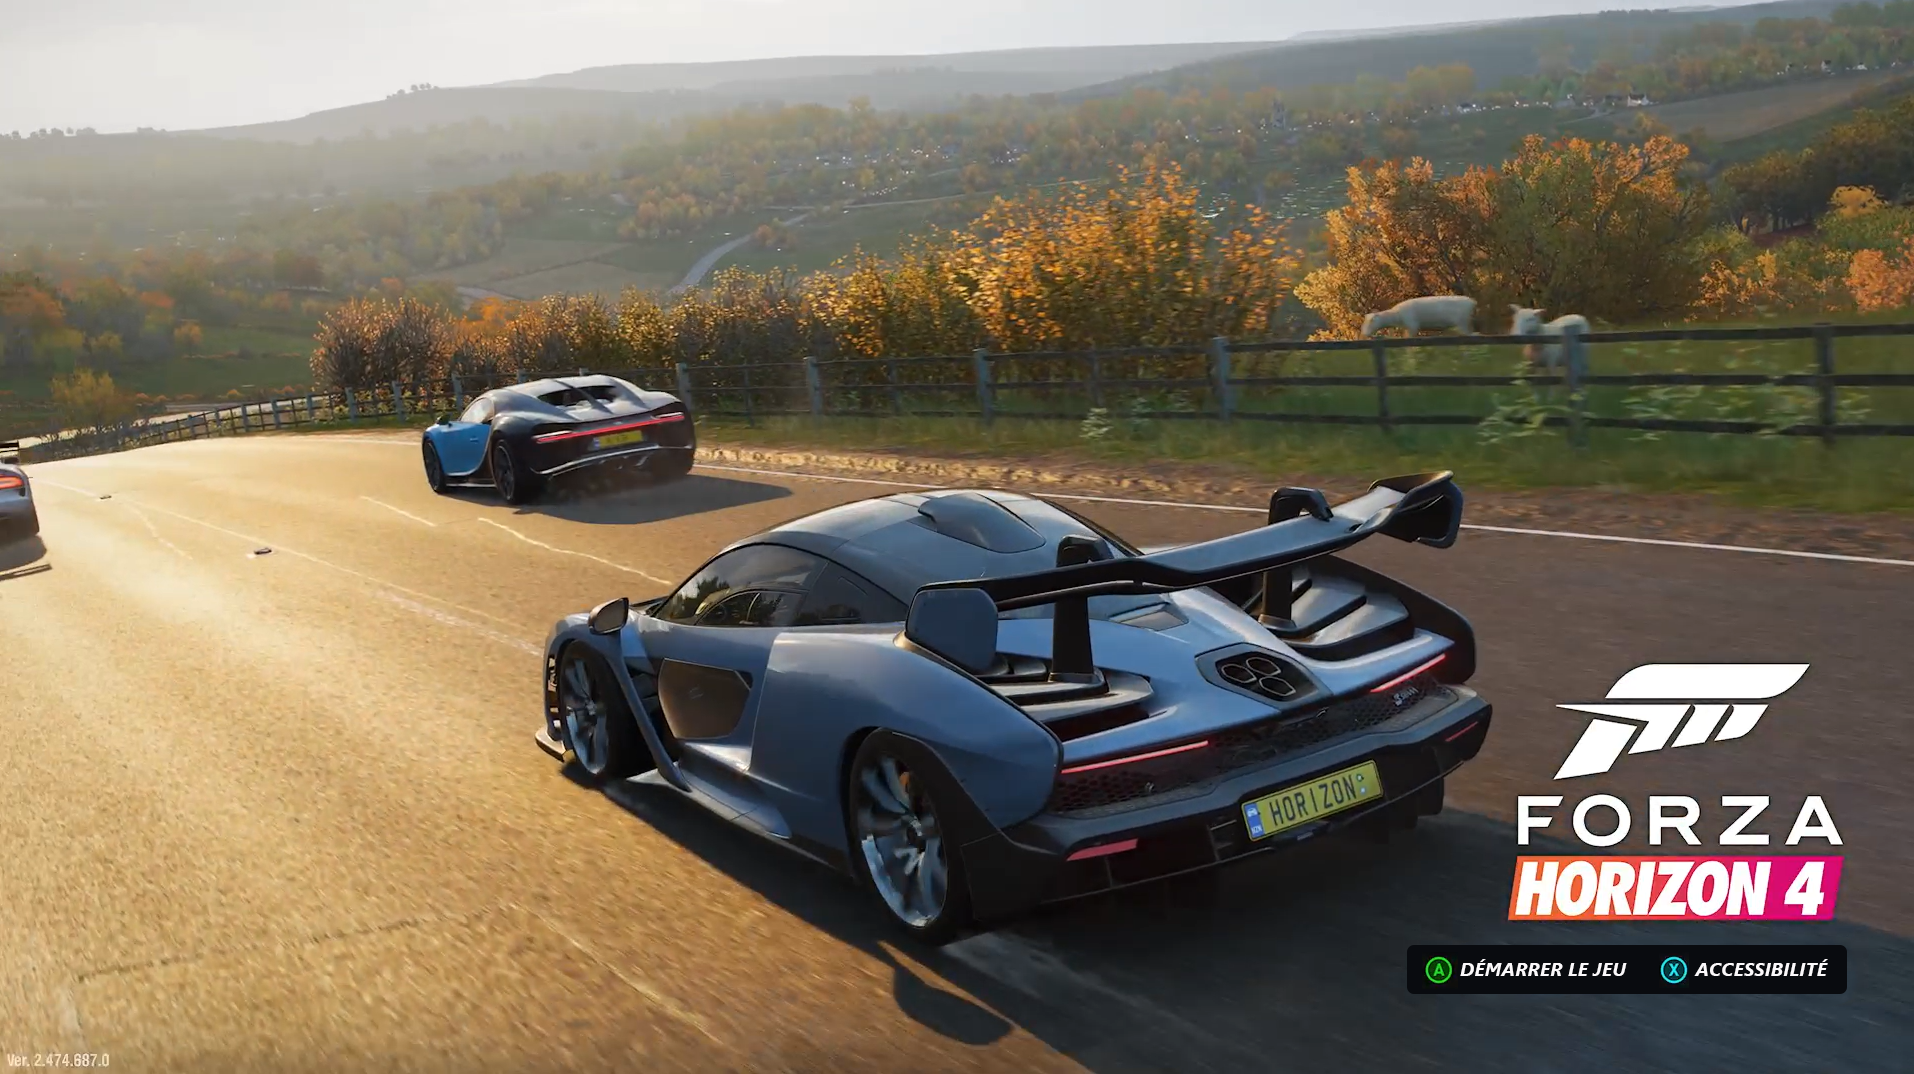 Screenshot that shows the start screen from Forza Horizon 4 with the option to select A to start the game and X to open the accessibility menu.